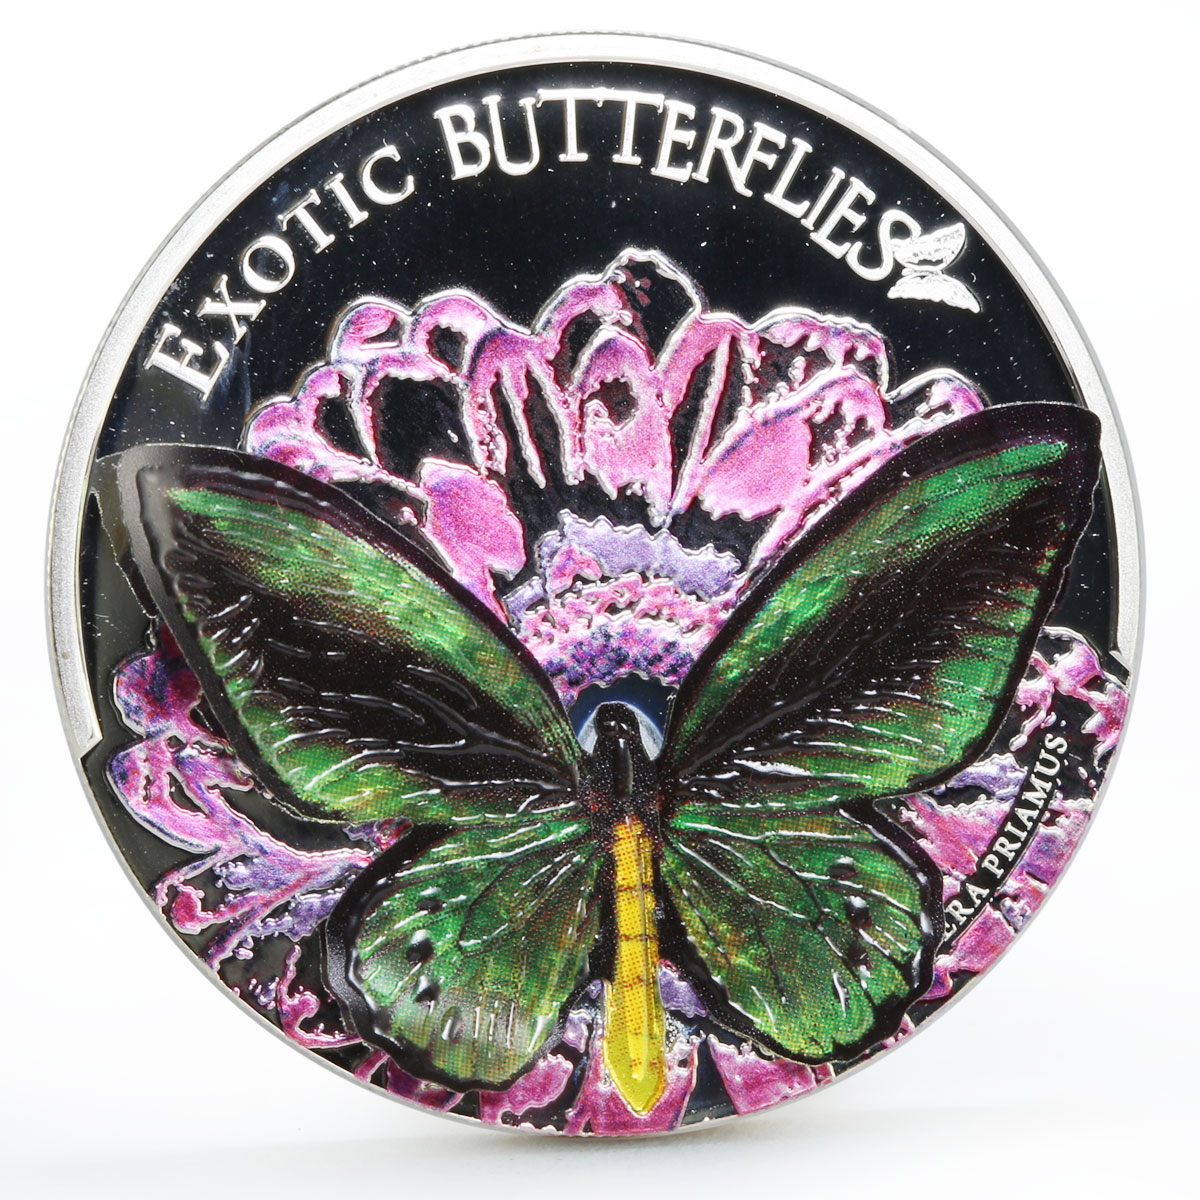 Tokelau 5 dollars Ornithoptera Priamus Butterfly colored proof silver coin 2012